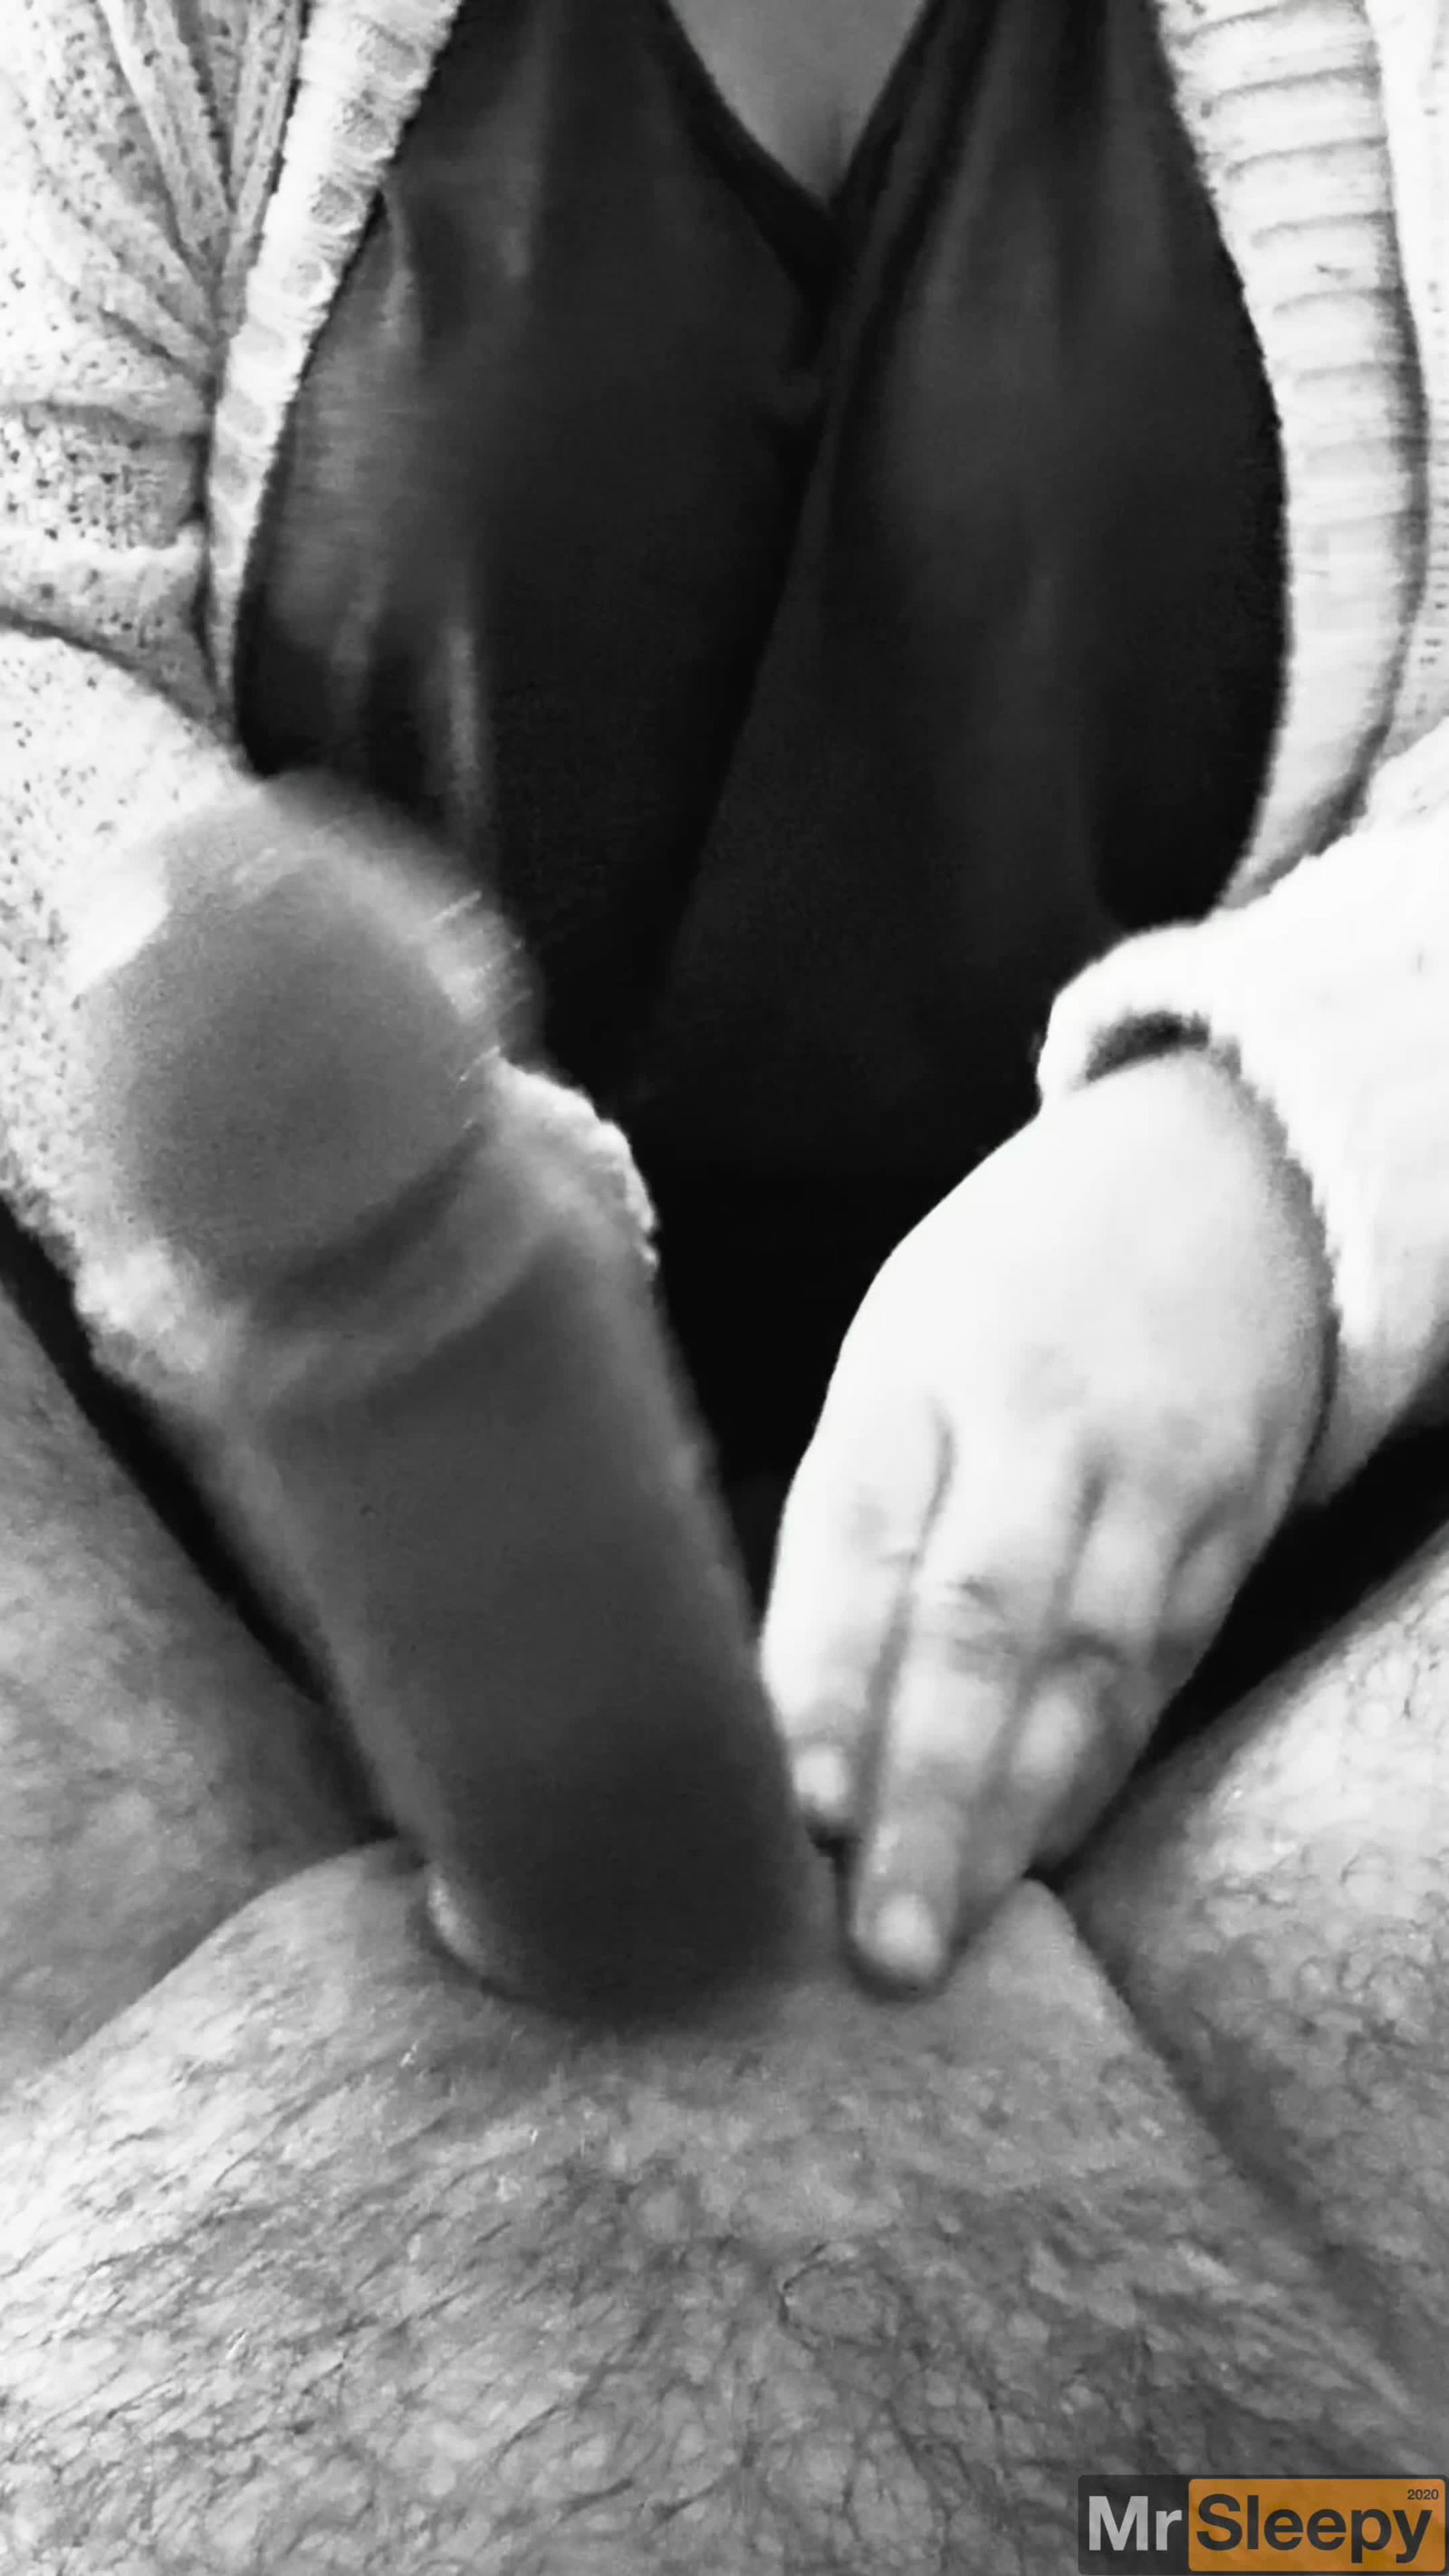 Watch the Video by MrSleepy with the username @MrSleepy, who is a verified user, posted on December 29, 2023. The post is about the topic Handjob. and the text says 'Cumshot in black & white after a long edging session! 🍆💦😍
Watch our full videos here https://www.pornhub.com/model/mrsleepy2020/videos?o=tr
#wife #handjob #MrSleepyOriginal #amateur #homemade #uncut #foreskin'